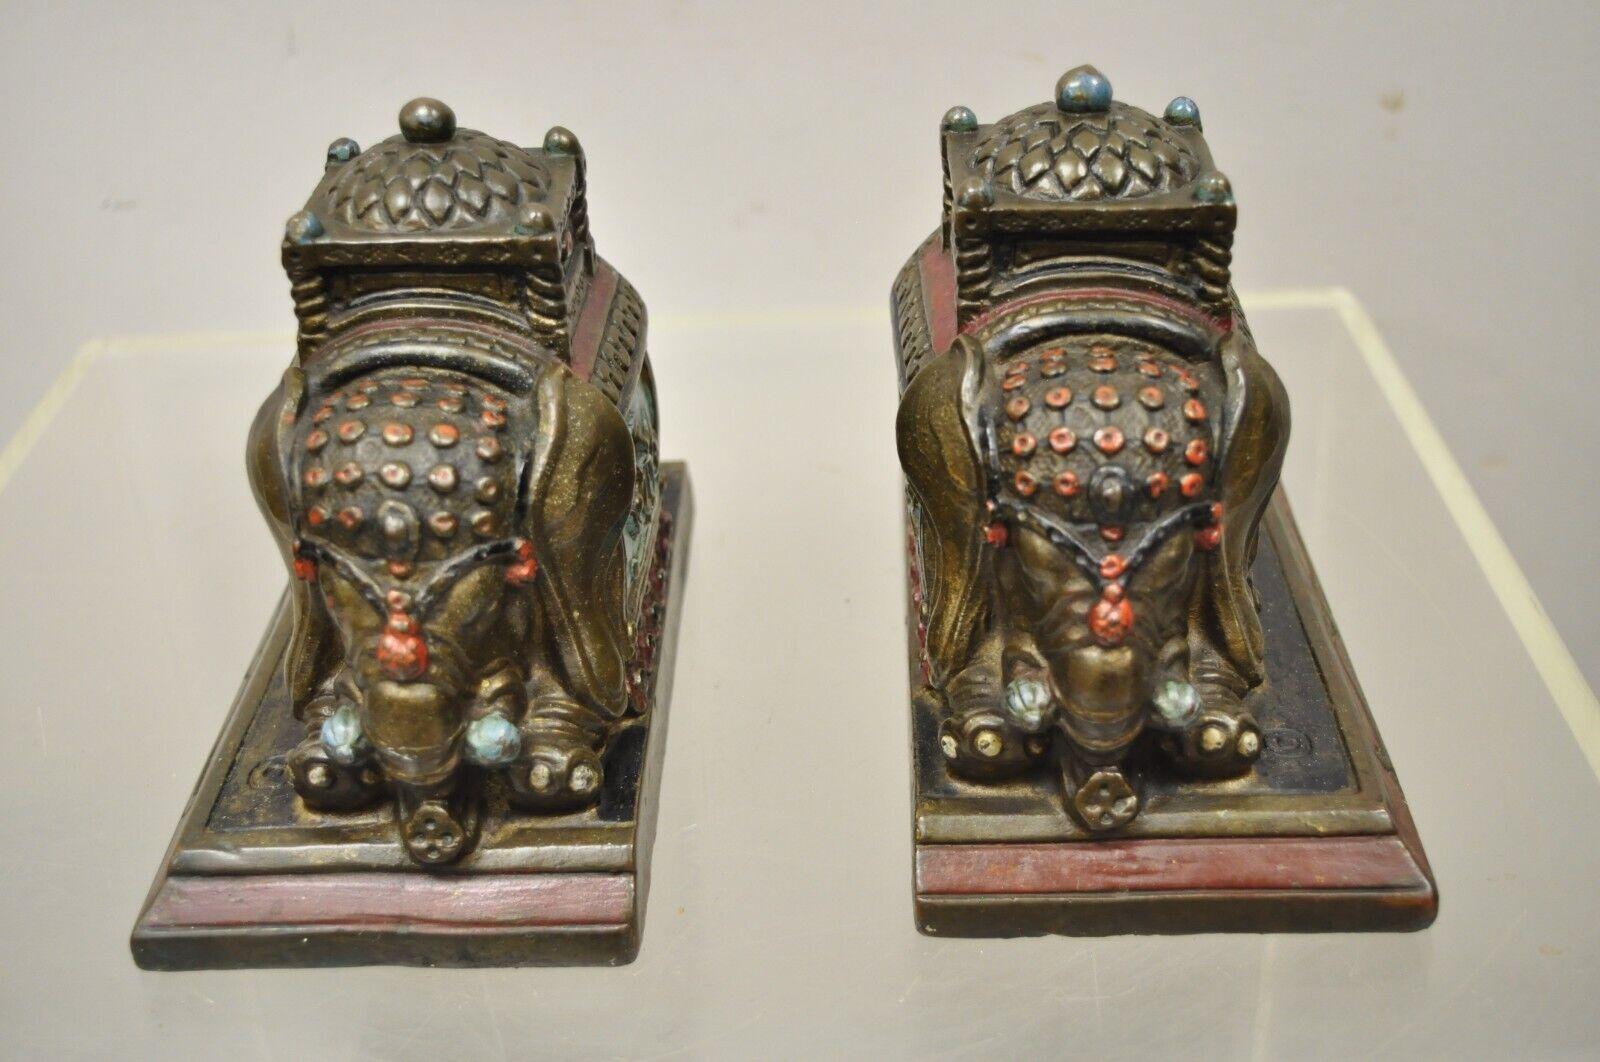 Antique Armor Bronze Indian Elephant Metal Clad Bookends, a Pair 4